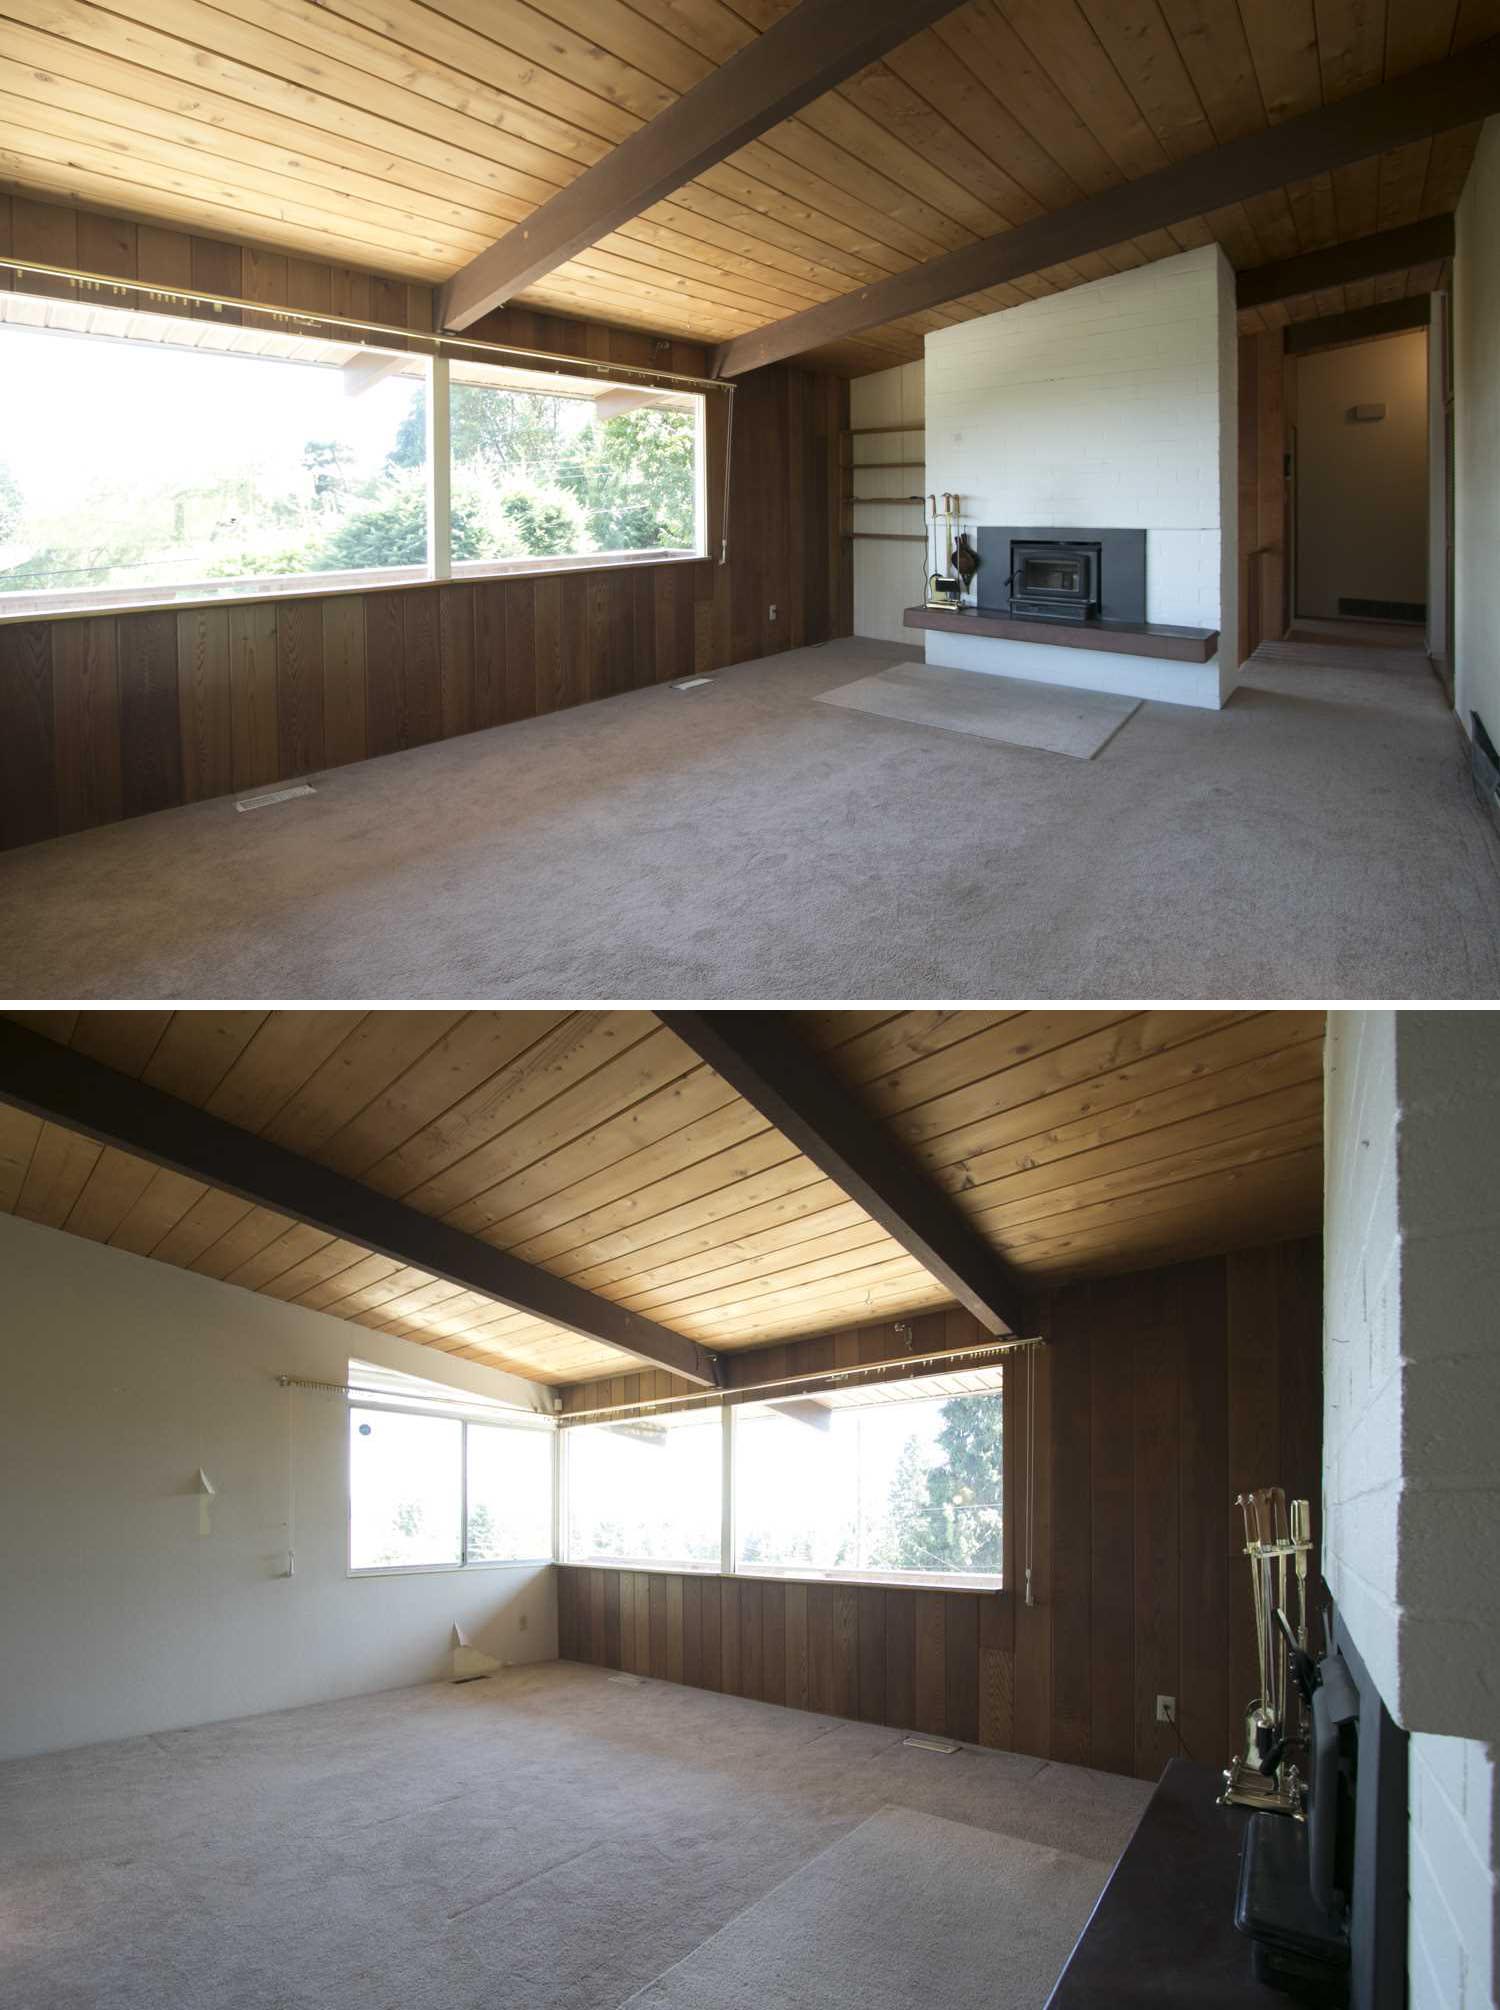 BEFORE - The original living room includes wood paneled walls, while carpet covered the floor.